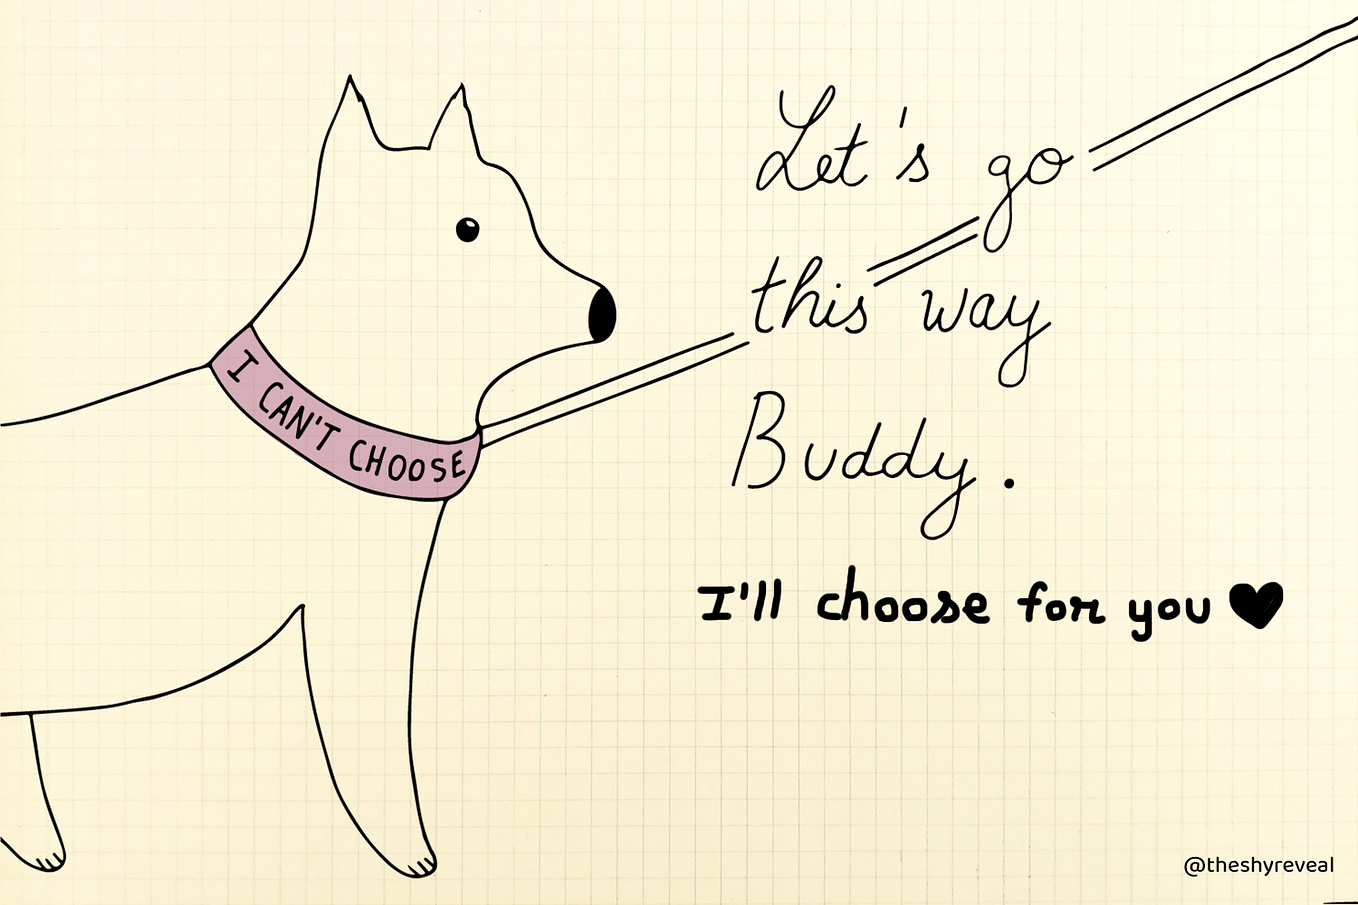 A dog on a leash with a collar that says: “I can’t choose”, and the phrase: “Let’s go this way Buddy. I’ll choose for you.”